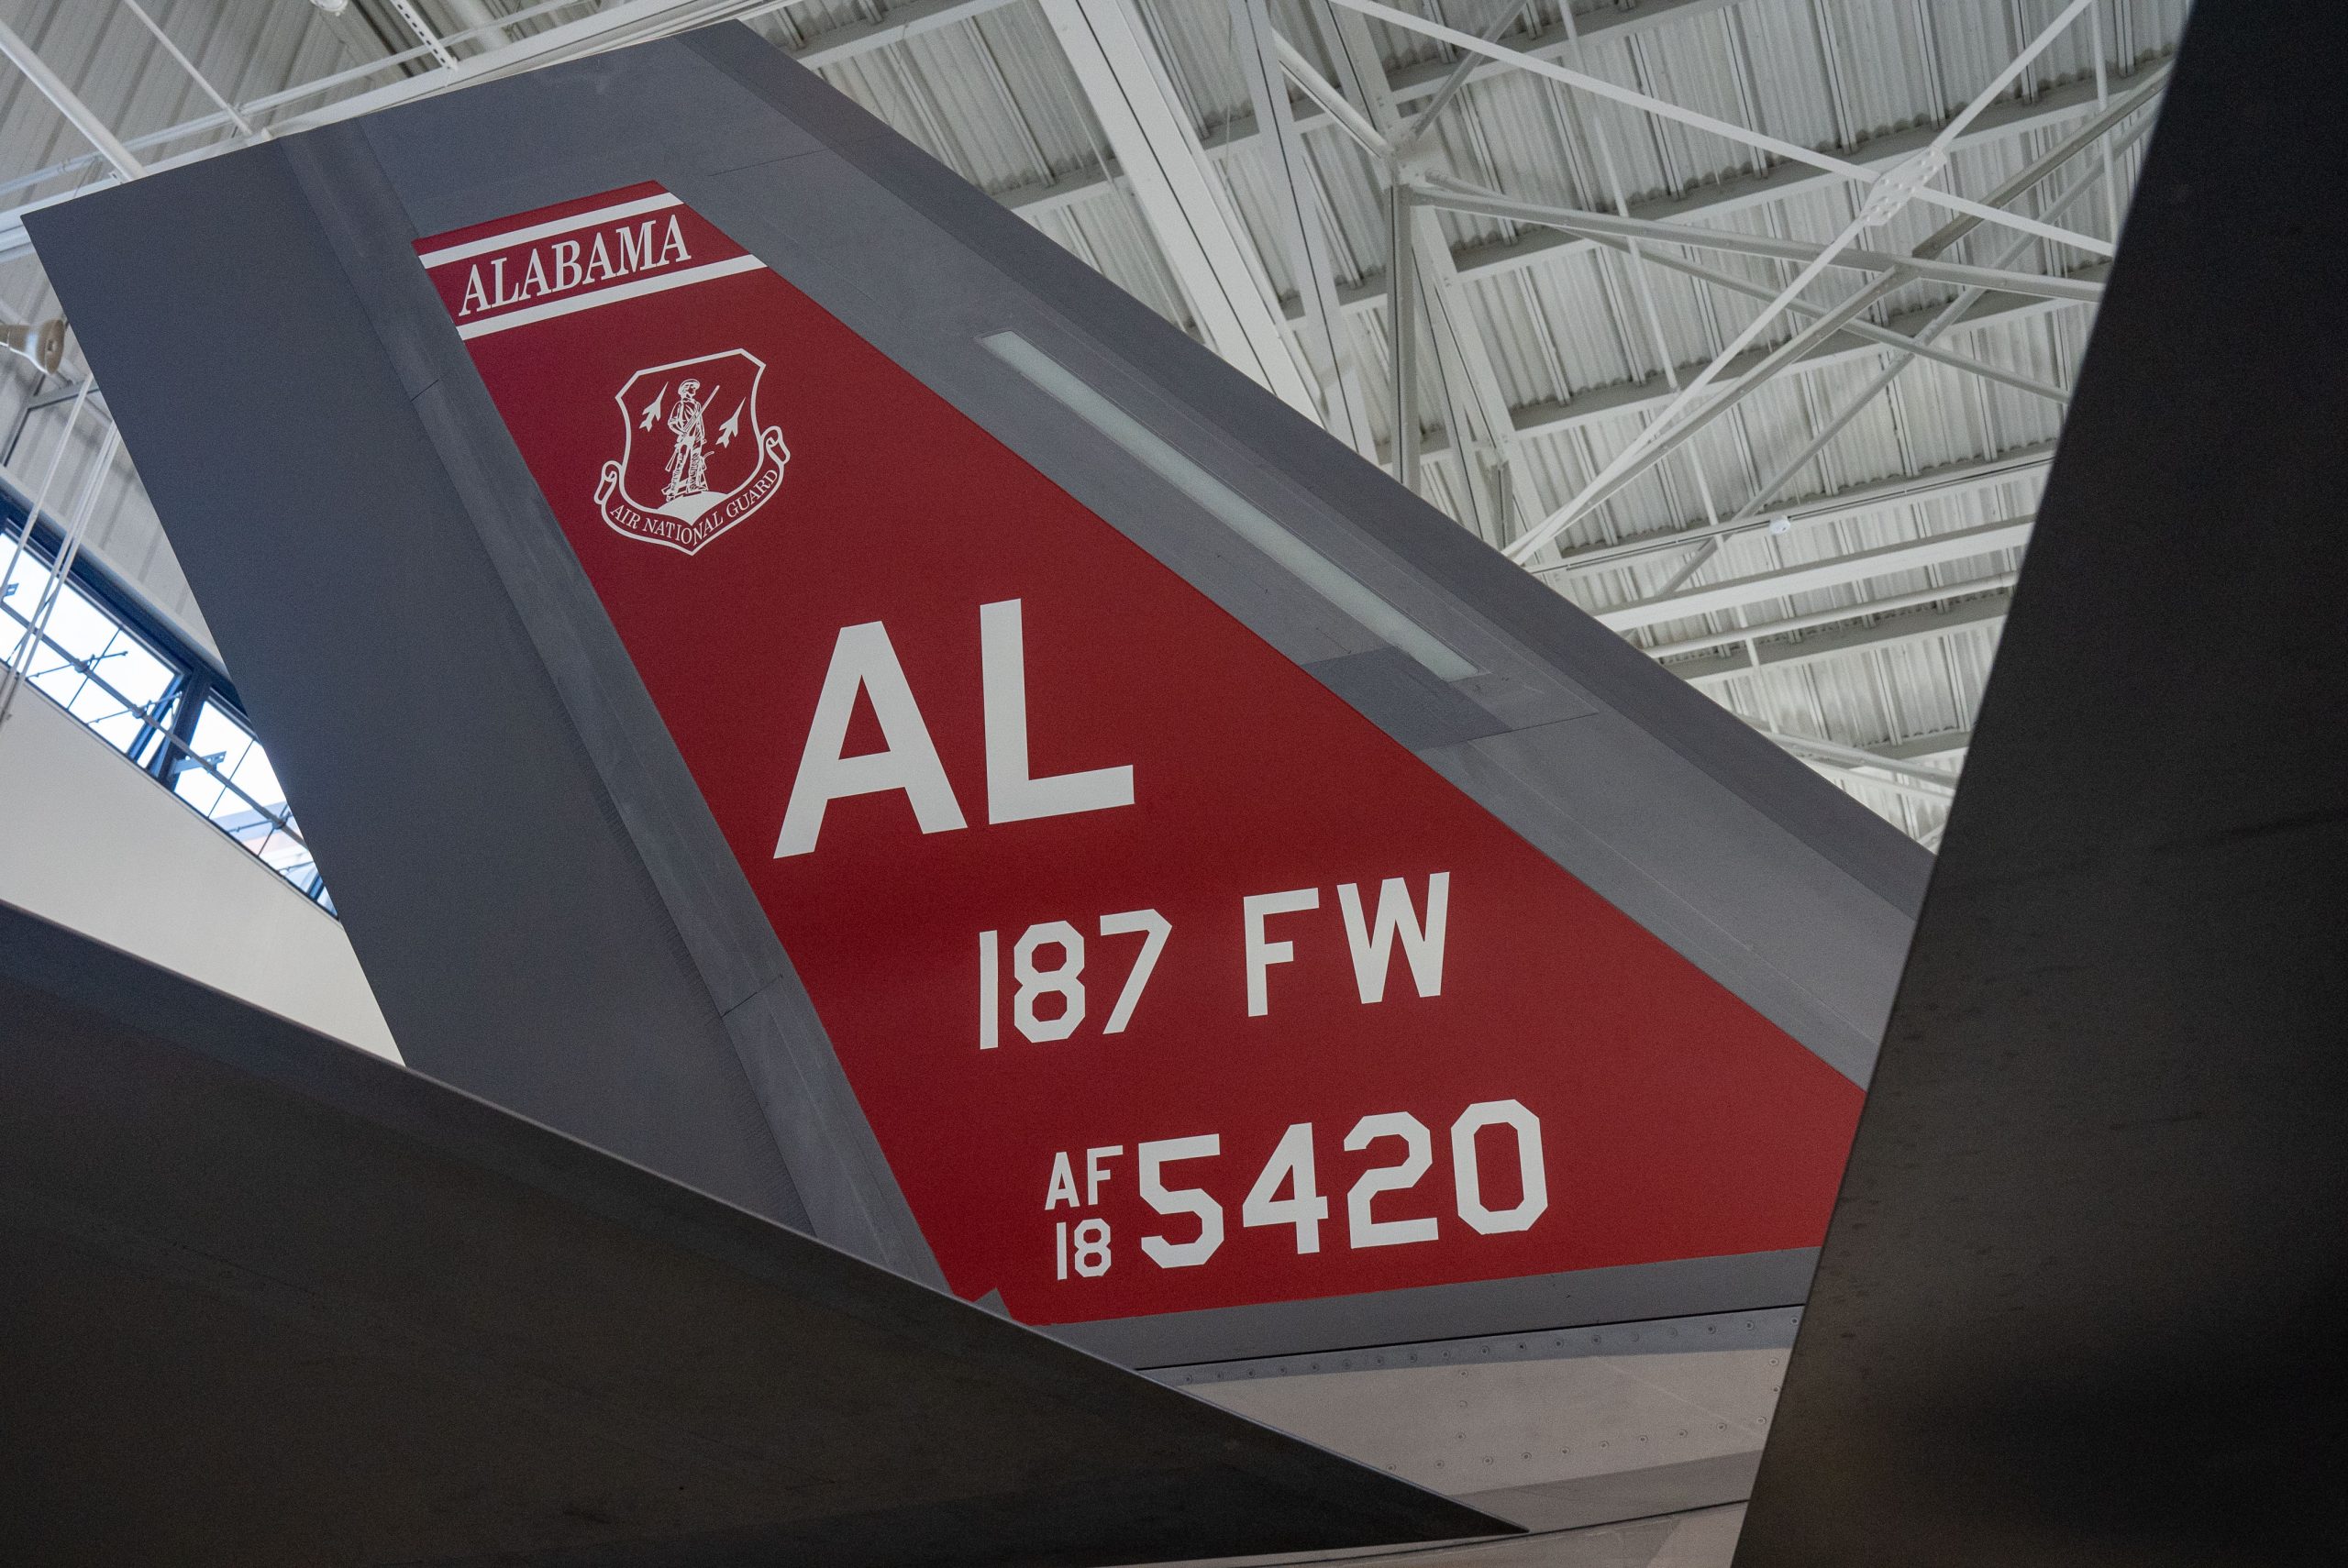 PHOTOS: Alabama Guard Wing Carries on Red Tail Tradition with New F-35